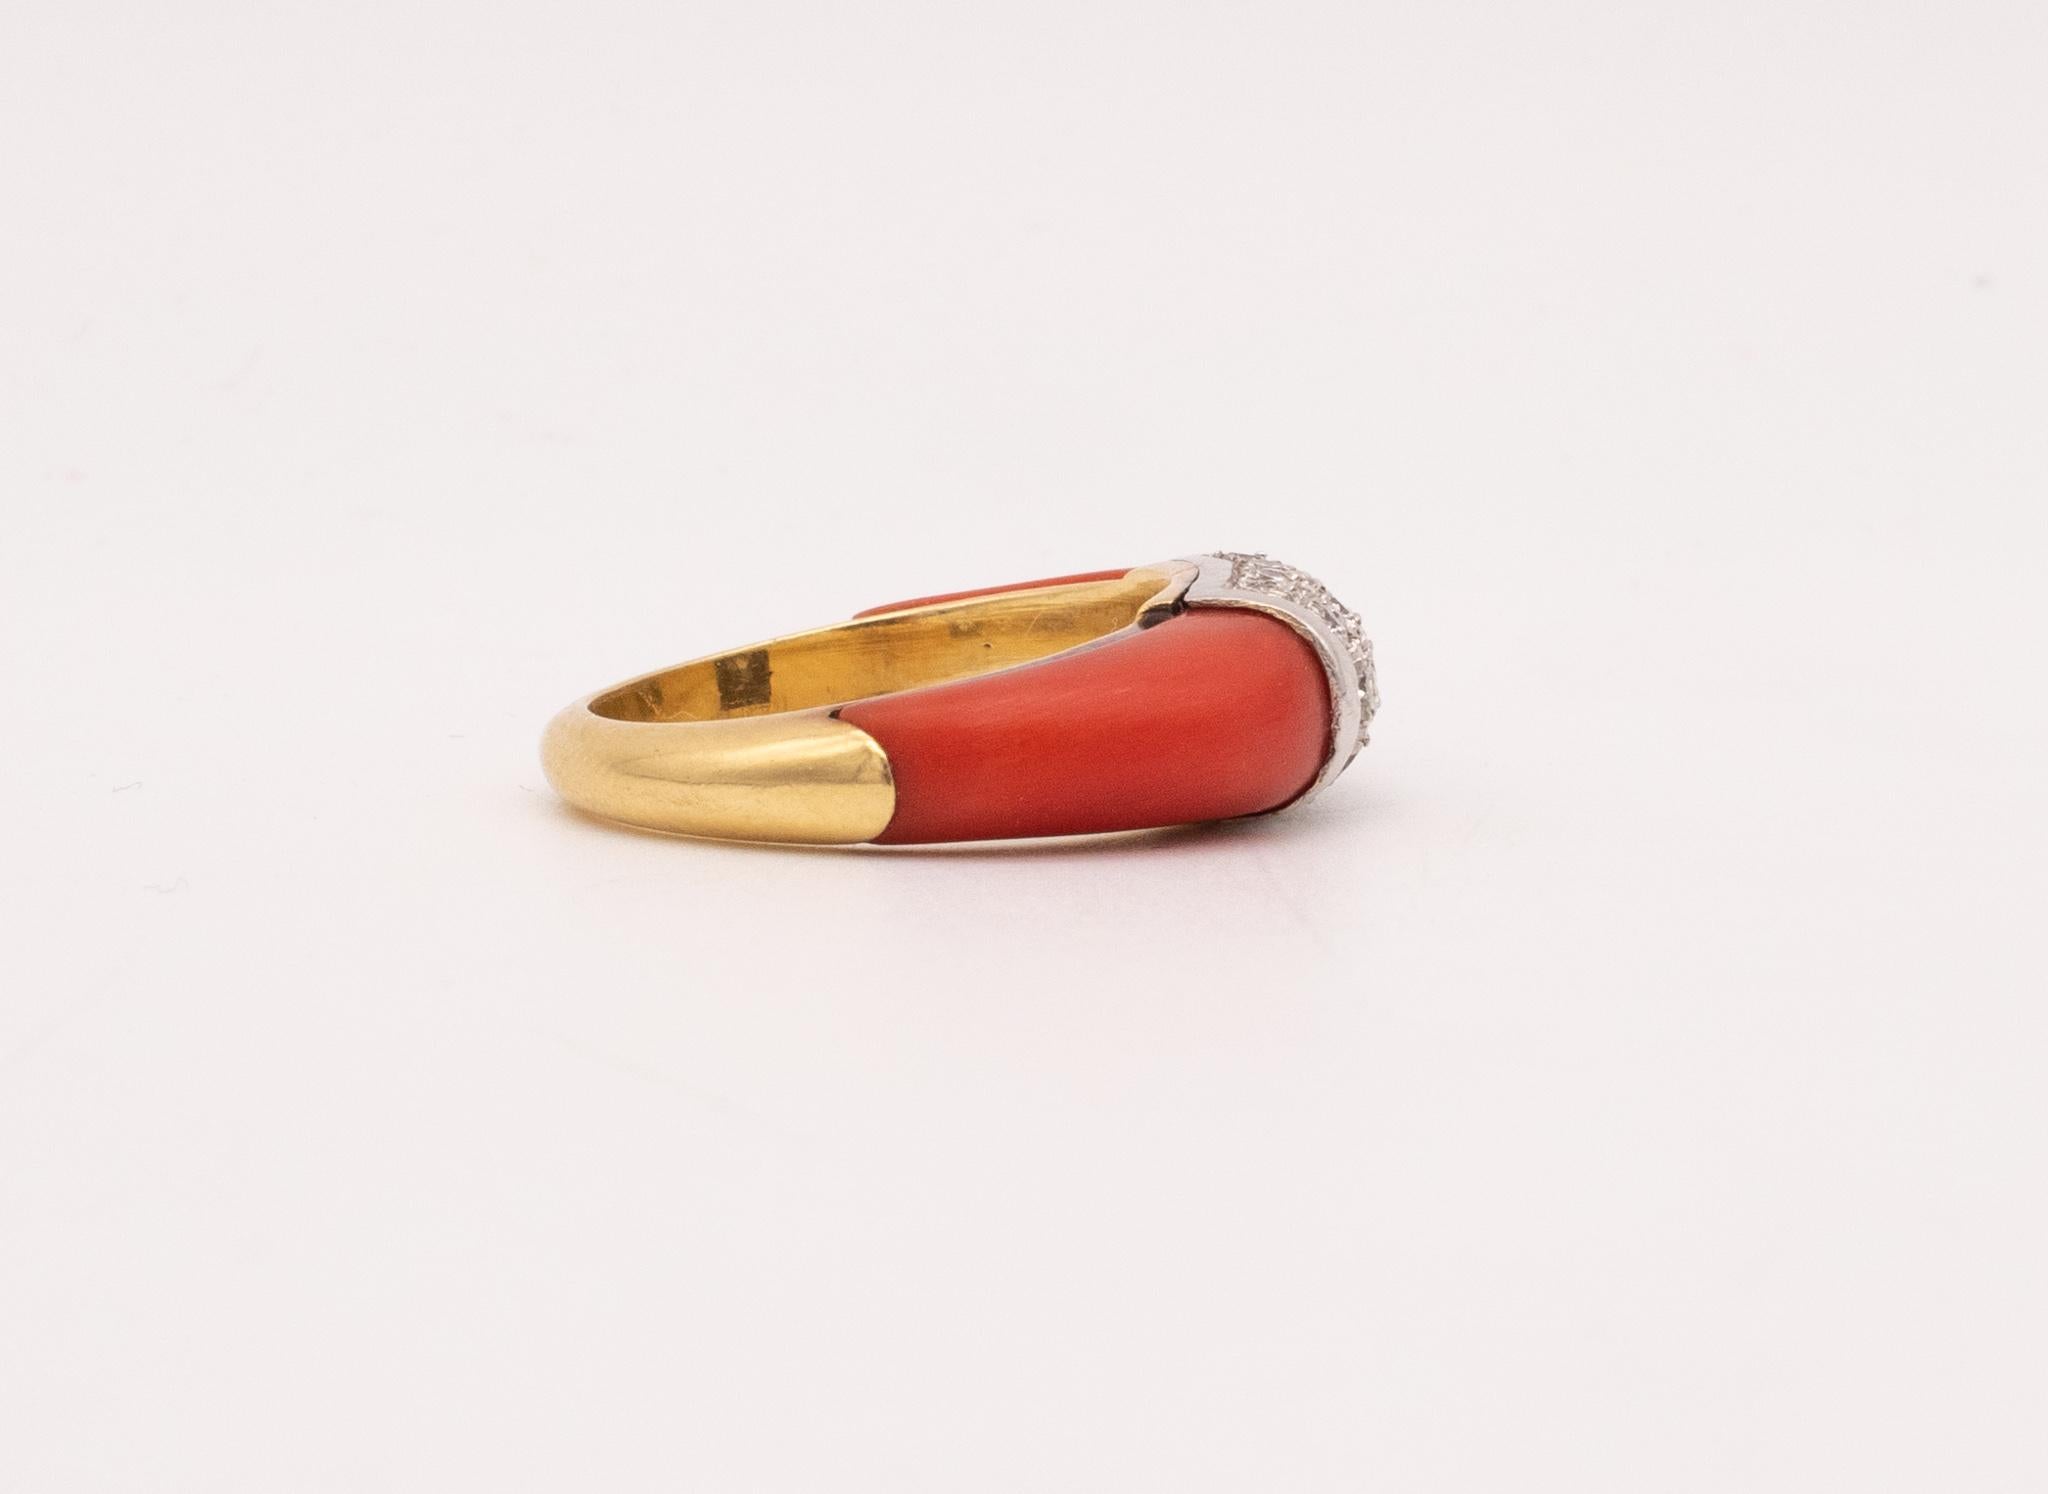 Modernist Van Cleef And Arpels Paris Philippines Ring 18Kt Yellow Gold Diamonds Red Coral.